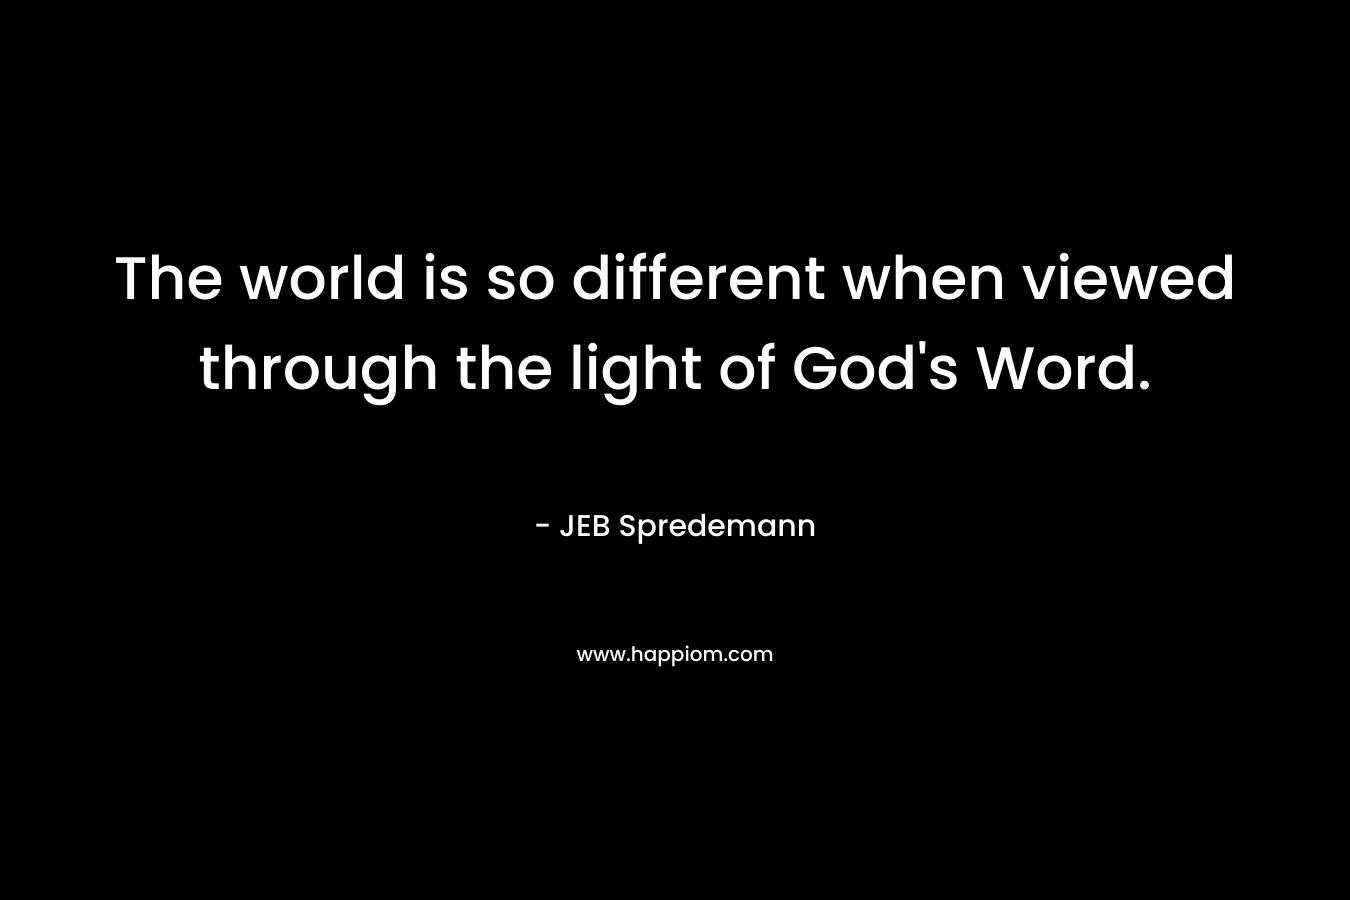 The world is so different when viewed through the light of God’s Word. – JEB Spredemann